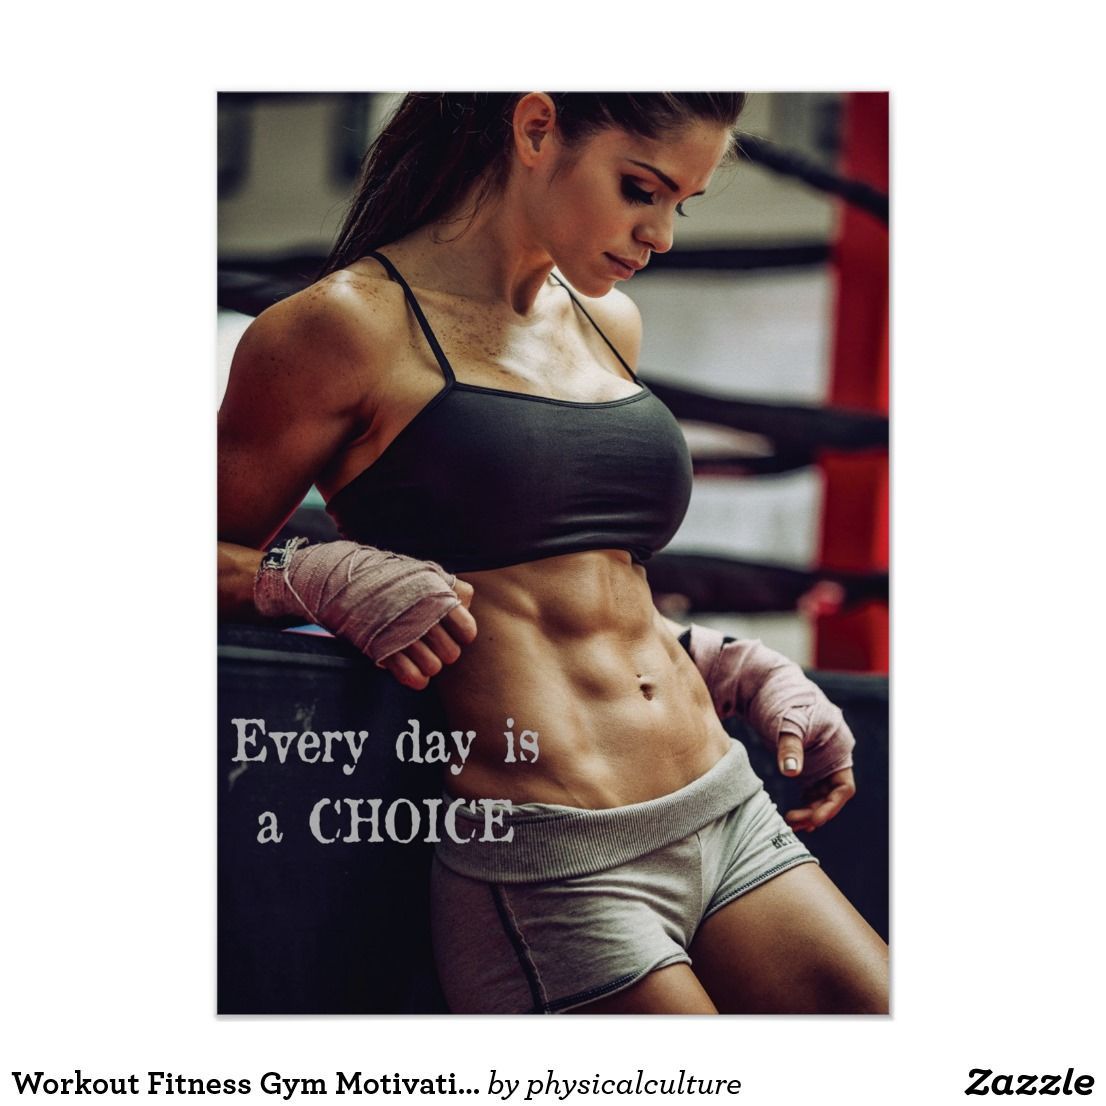 Workout Fitness Gym Motivational Poster -   22 fitness photoshoot boxing
 ideas